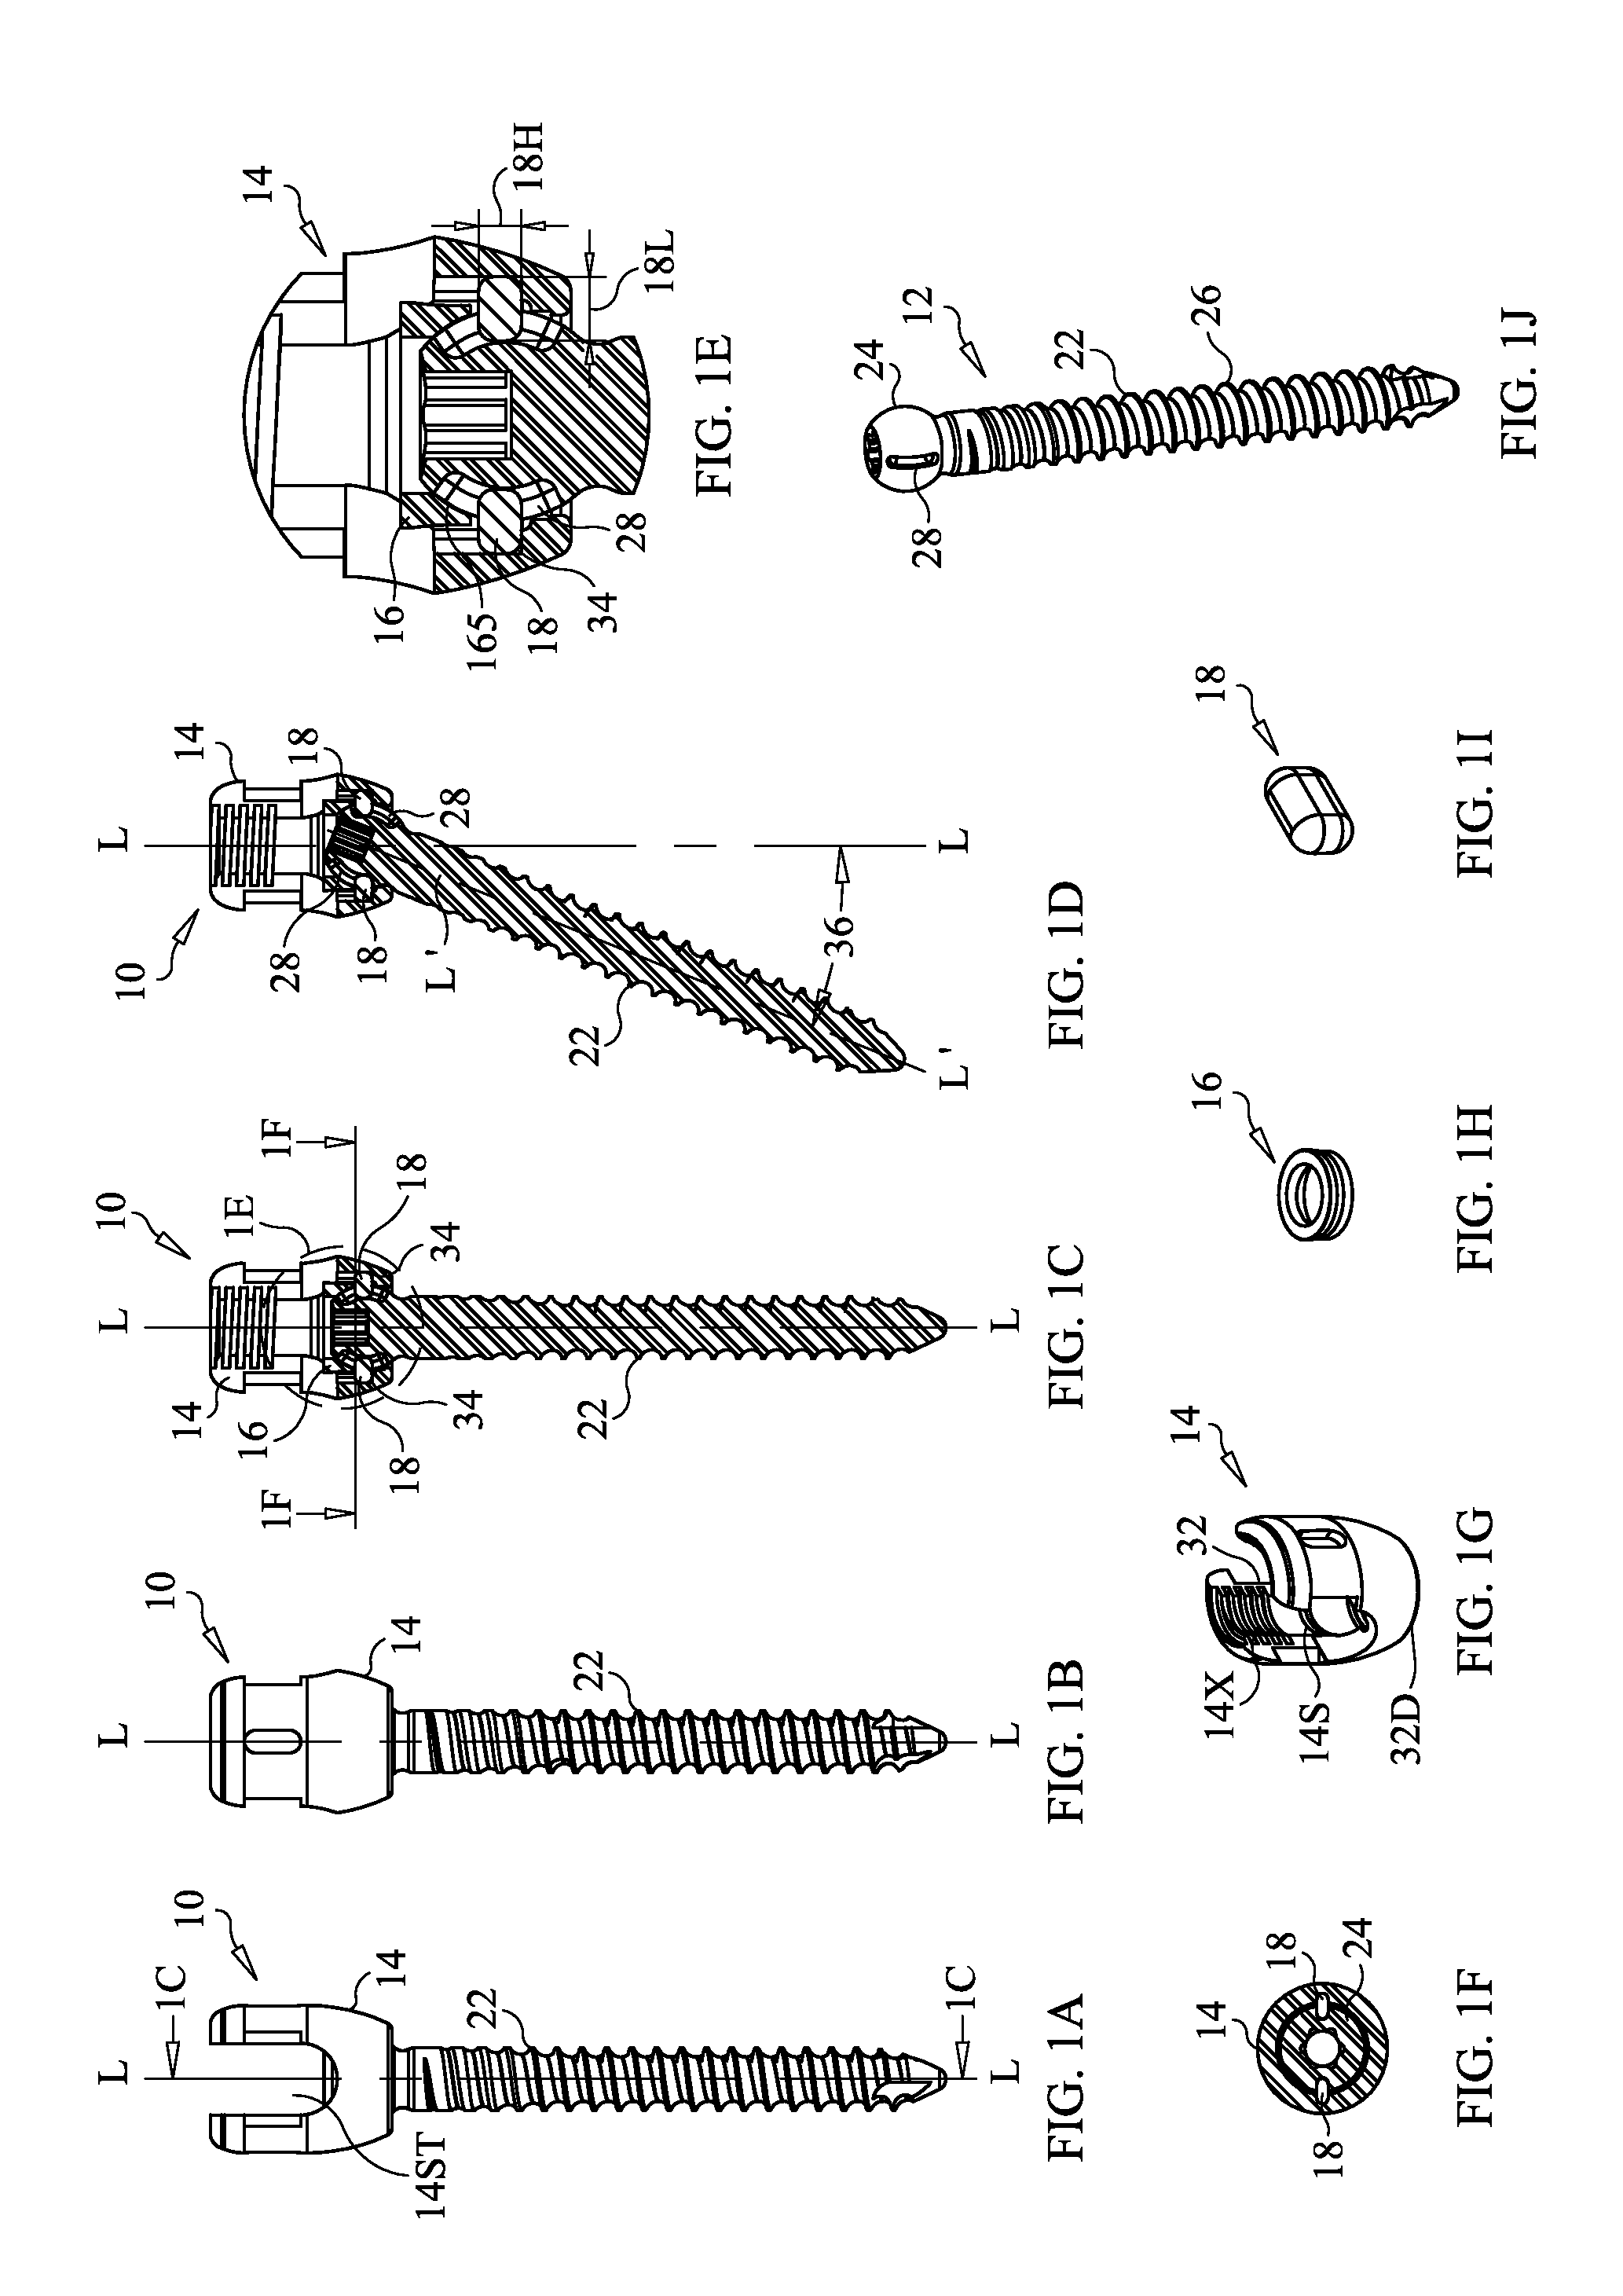 Staged Locking of Surgical Screw Assembly